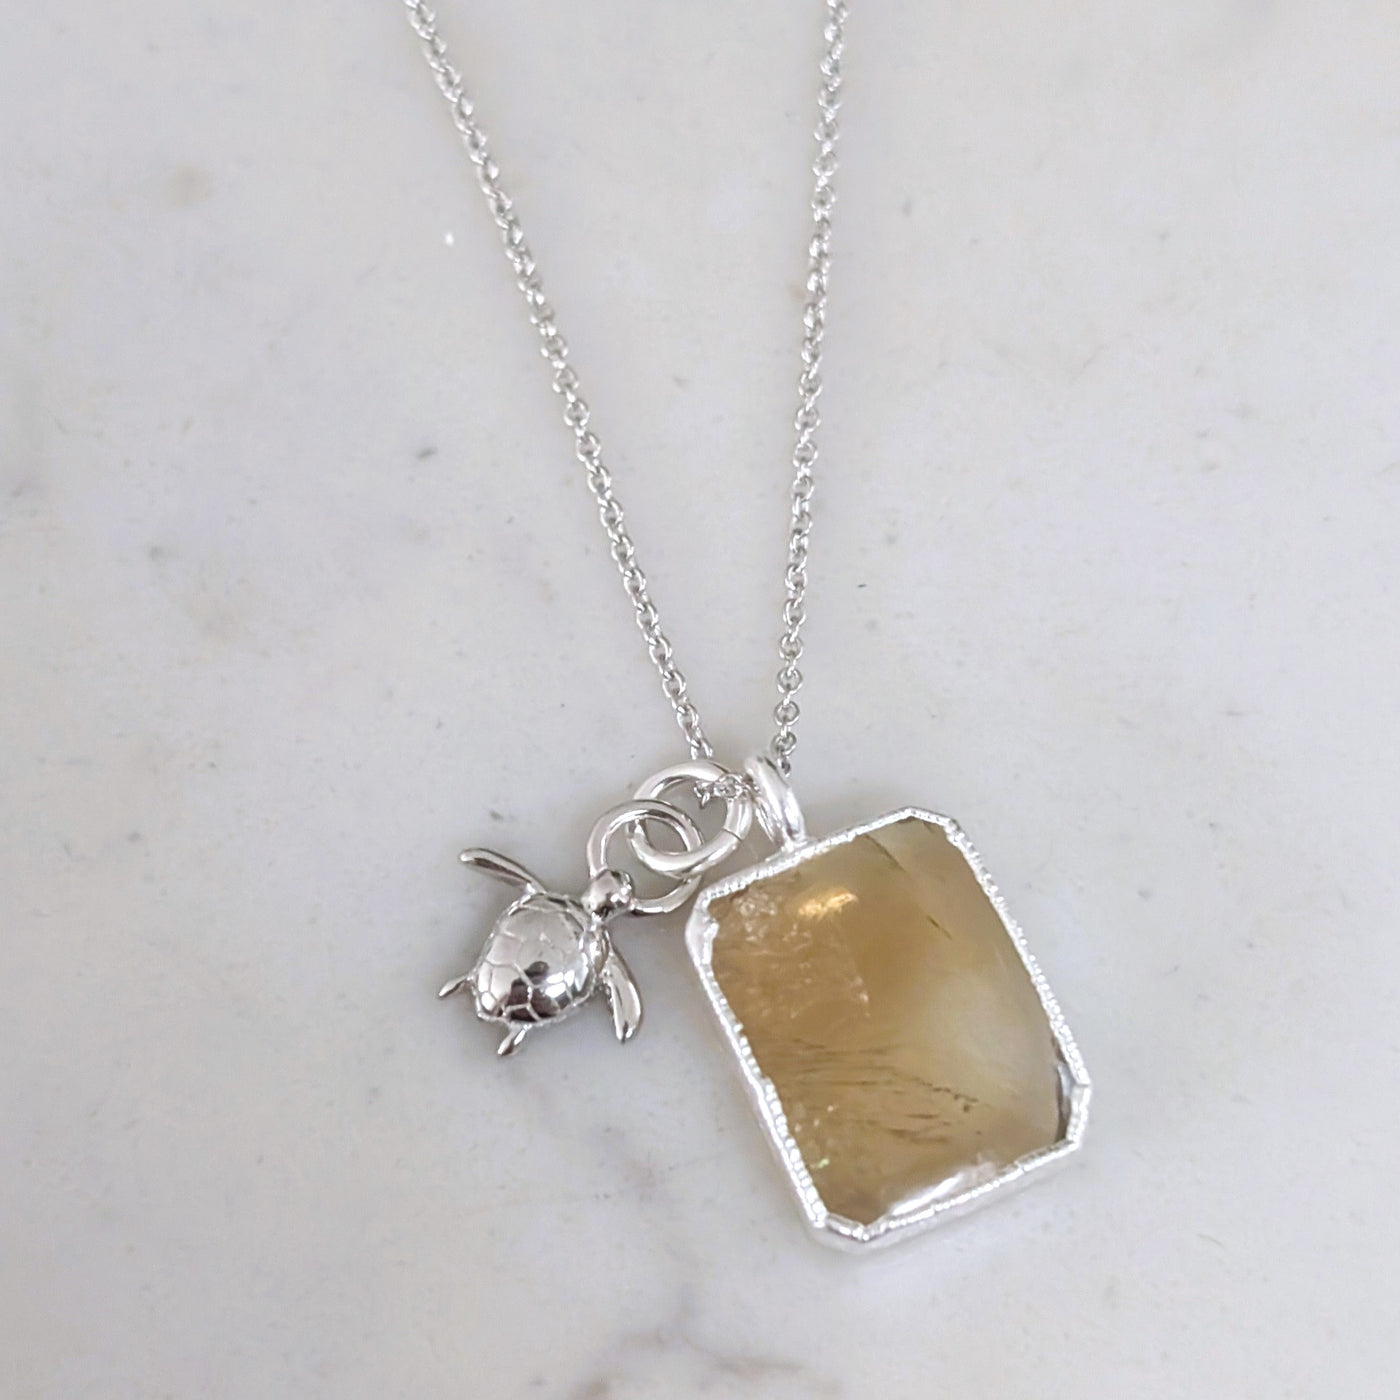 silver citrine pendant necklace with turtle charm